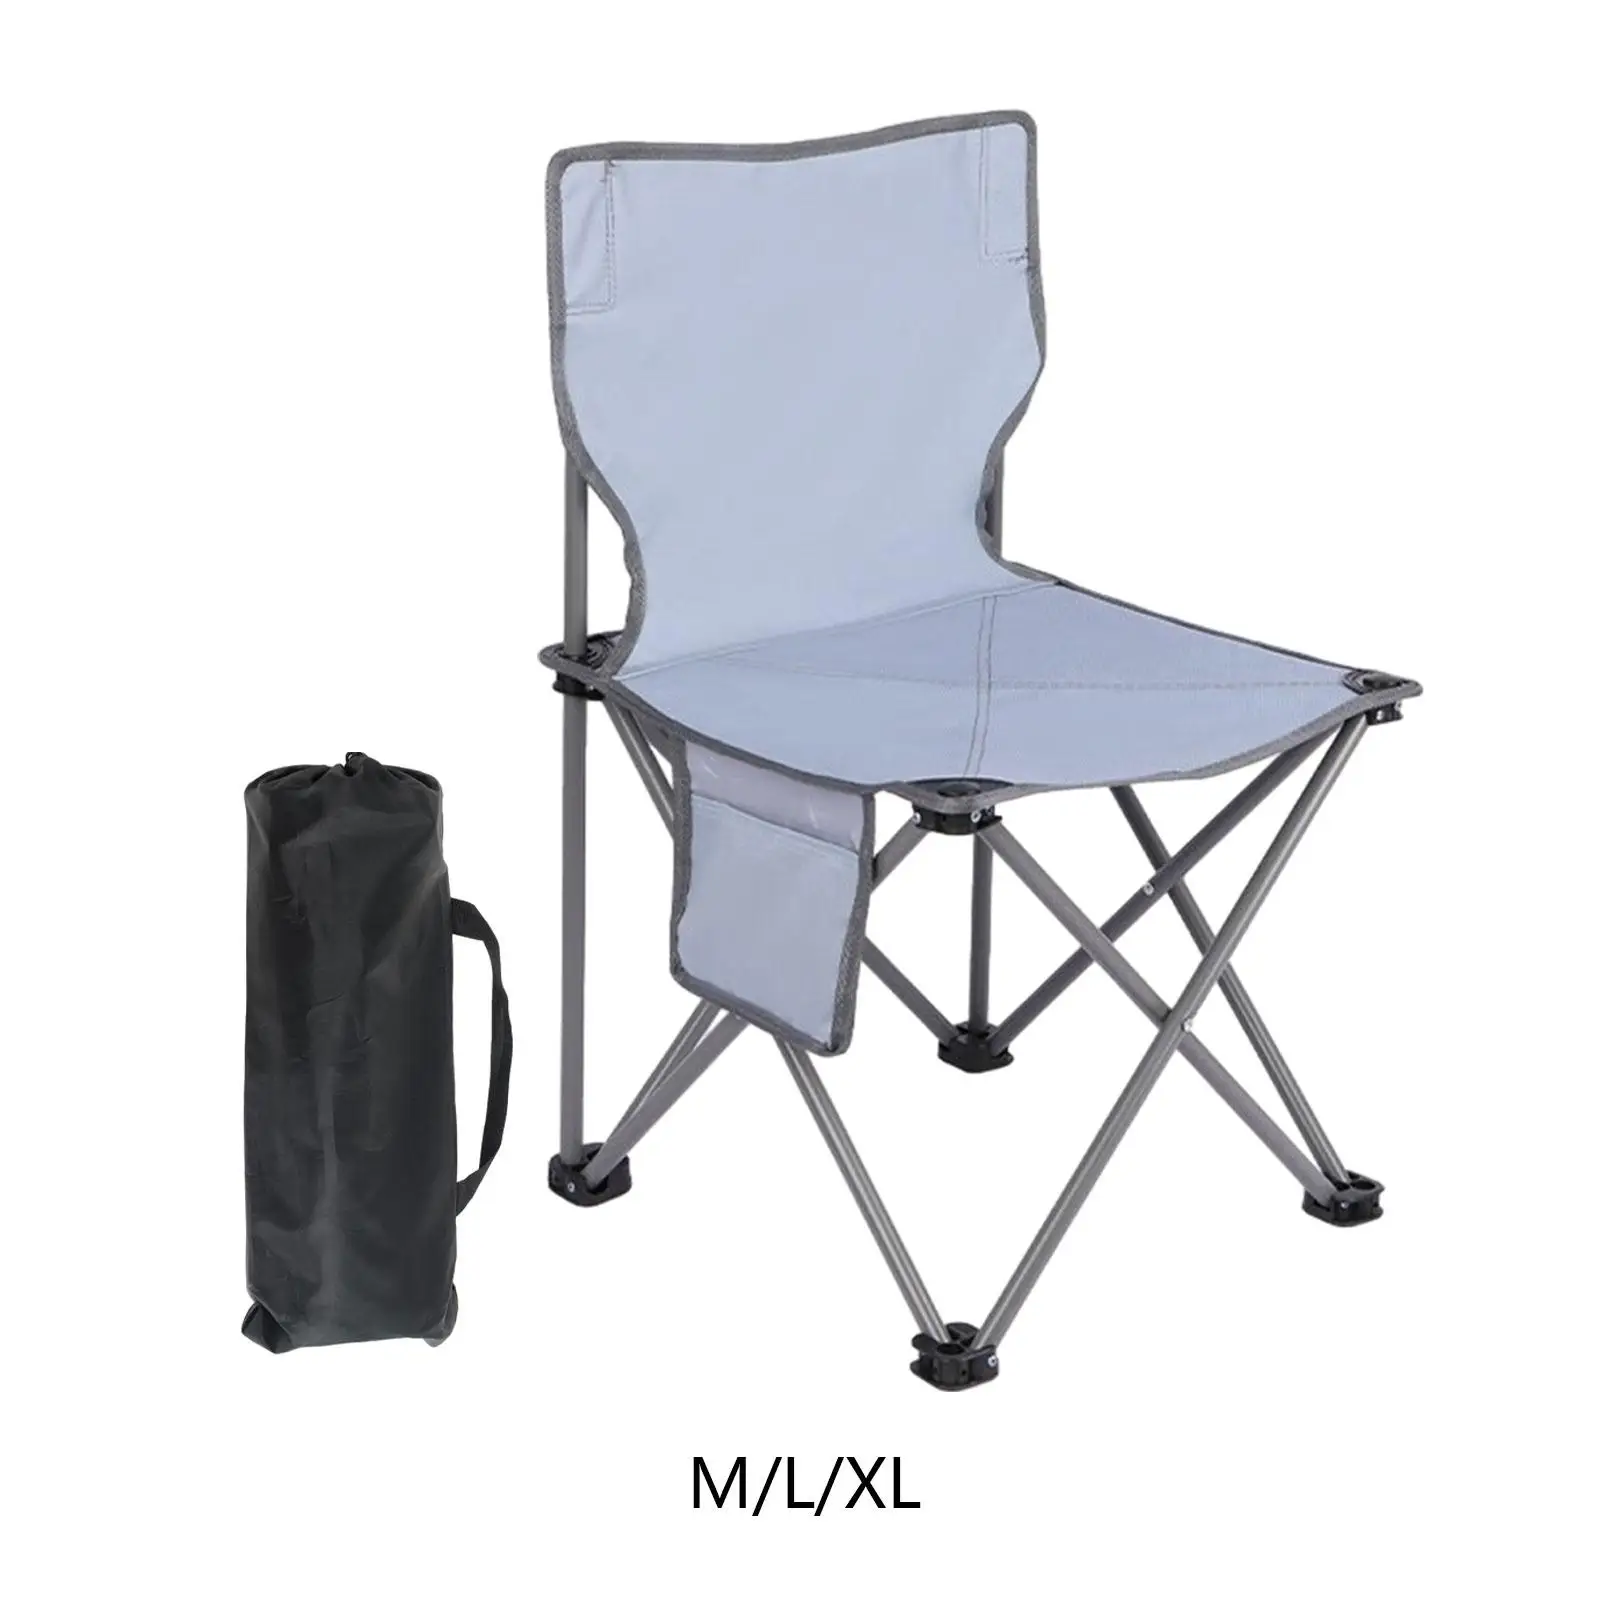 Portable Camping Chair Folding Outdoor Garden Backpacking Chair